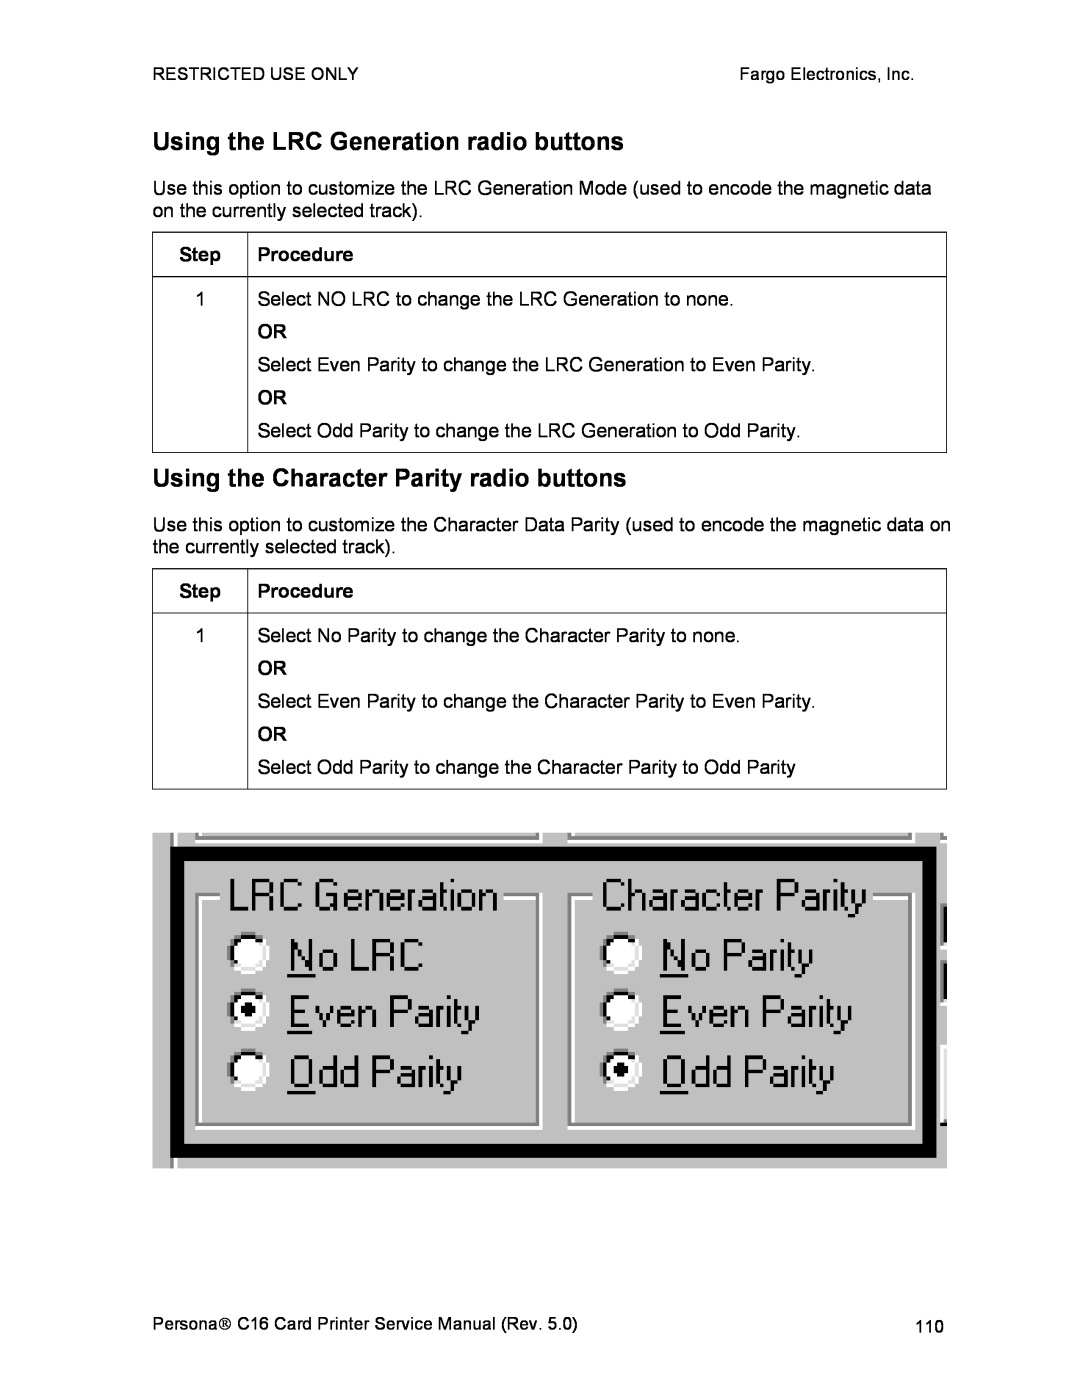 FARGO electronic C16 service manual Using the LRC Generation radio buttons, Using the Character Parity radio buttons 